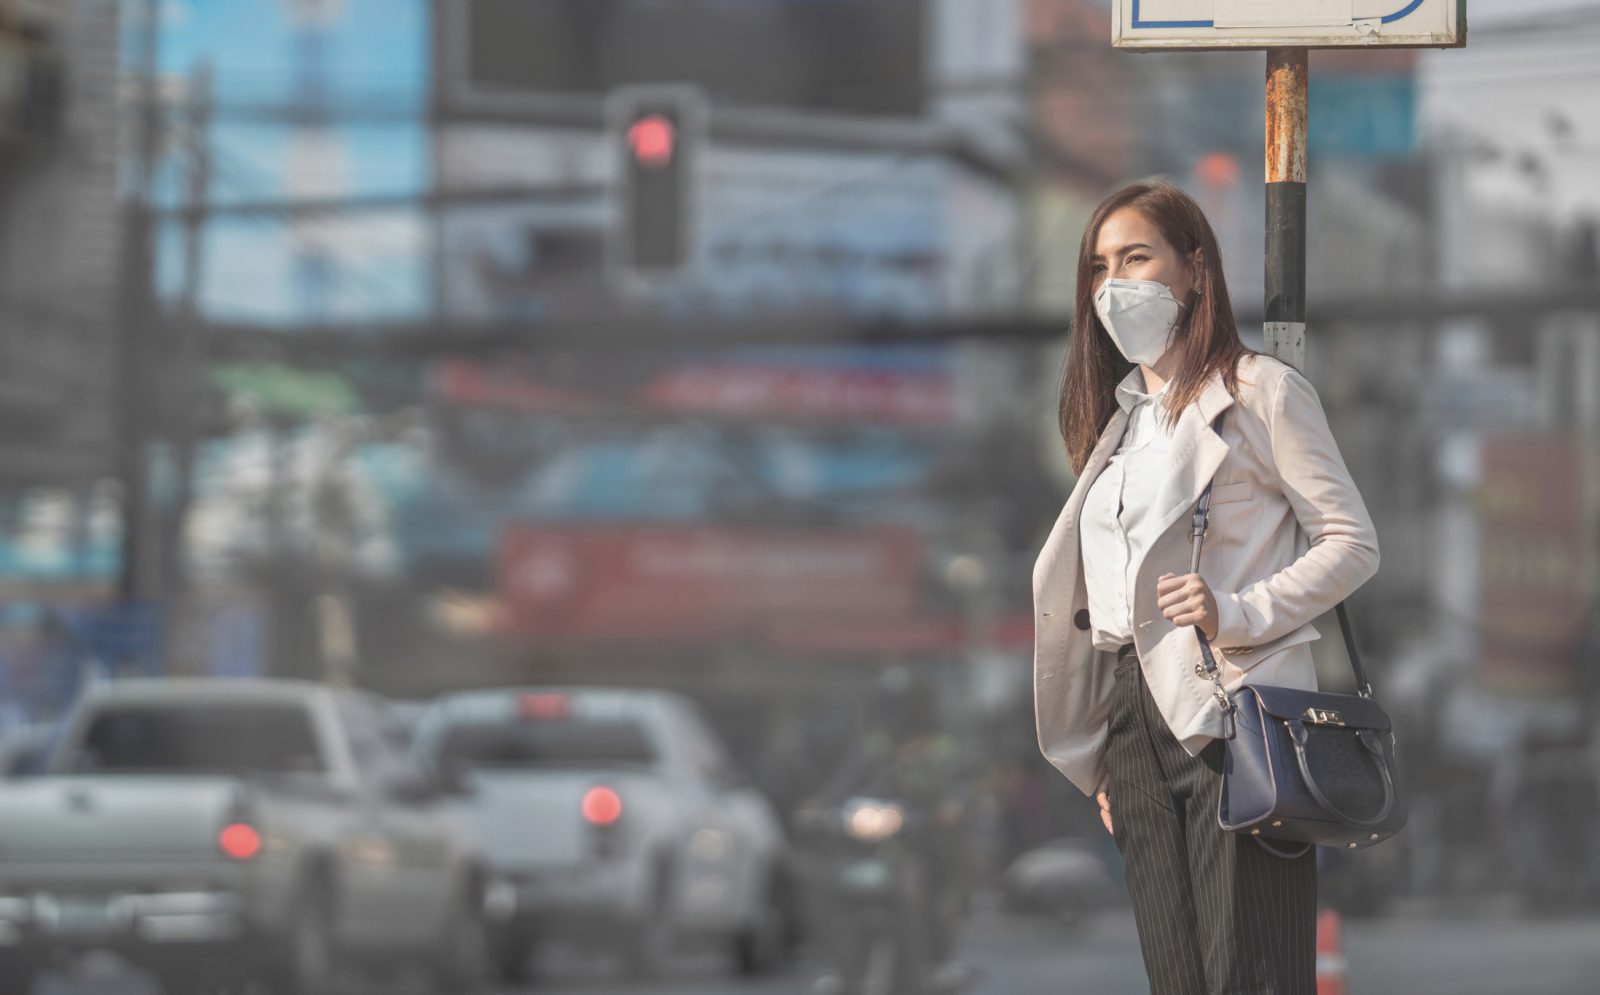 A woman stands at a bus stop, clutching her purse and wearing an N95 mask, with a blurred intersection, vehicles, traffic lights and buildings in the background.